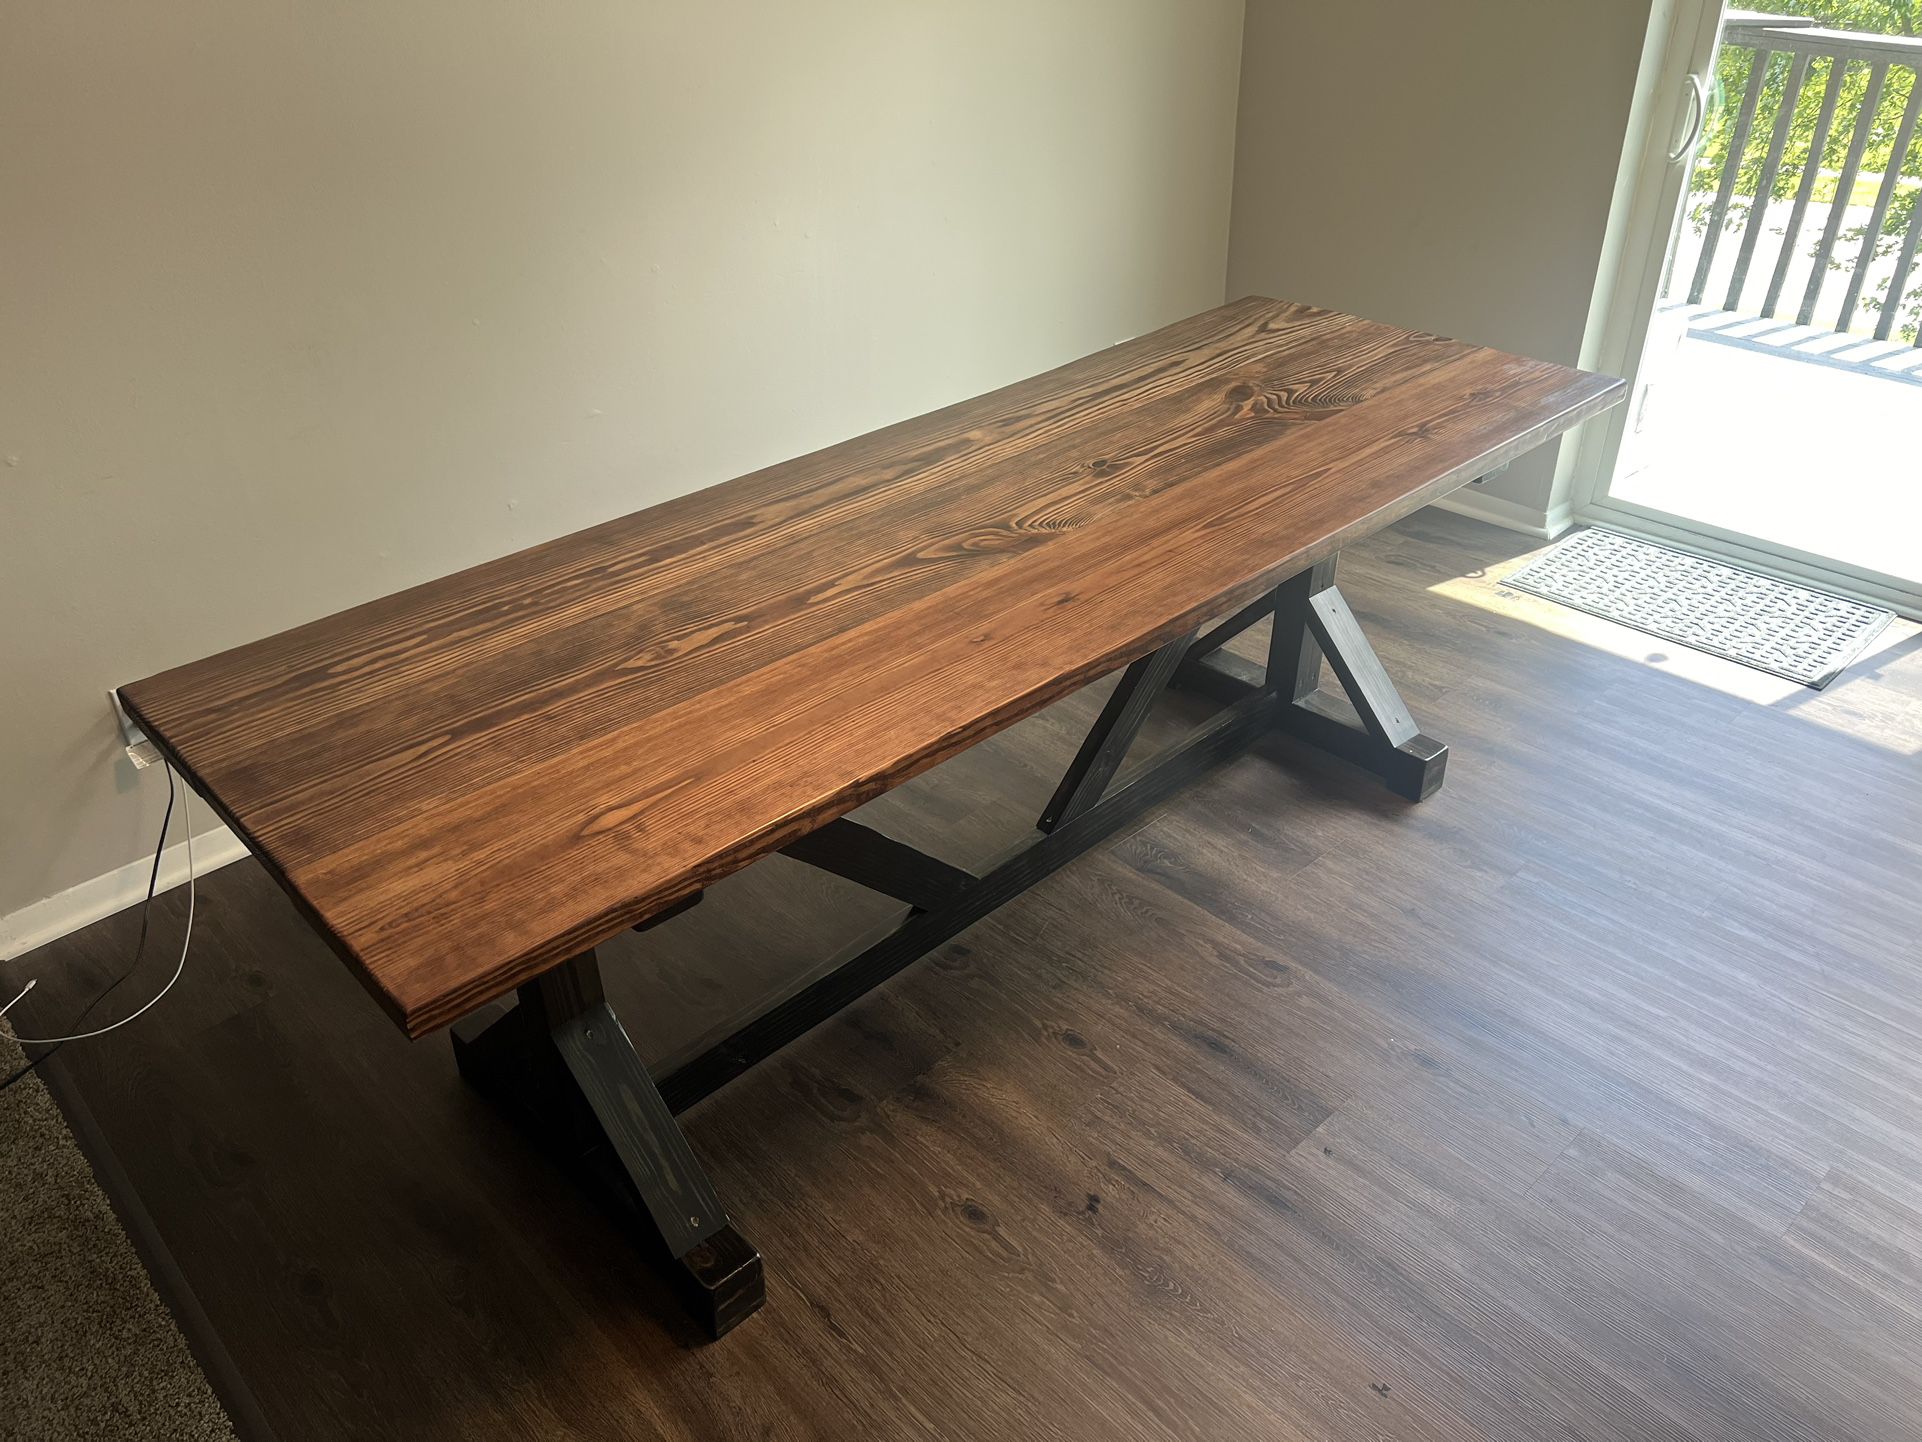 Wooden Table - Handcrafted